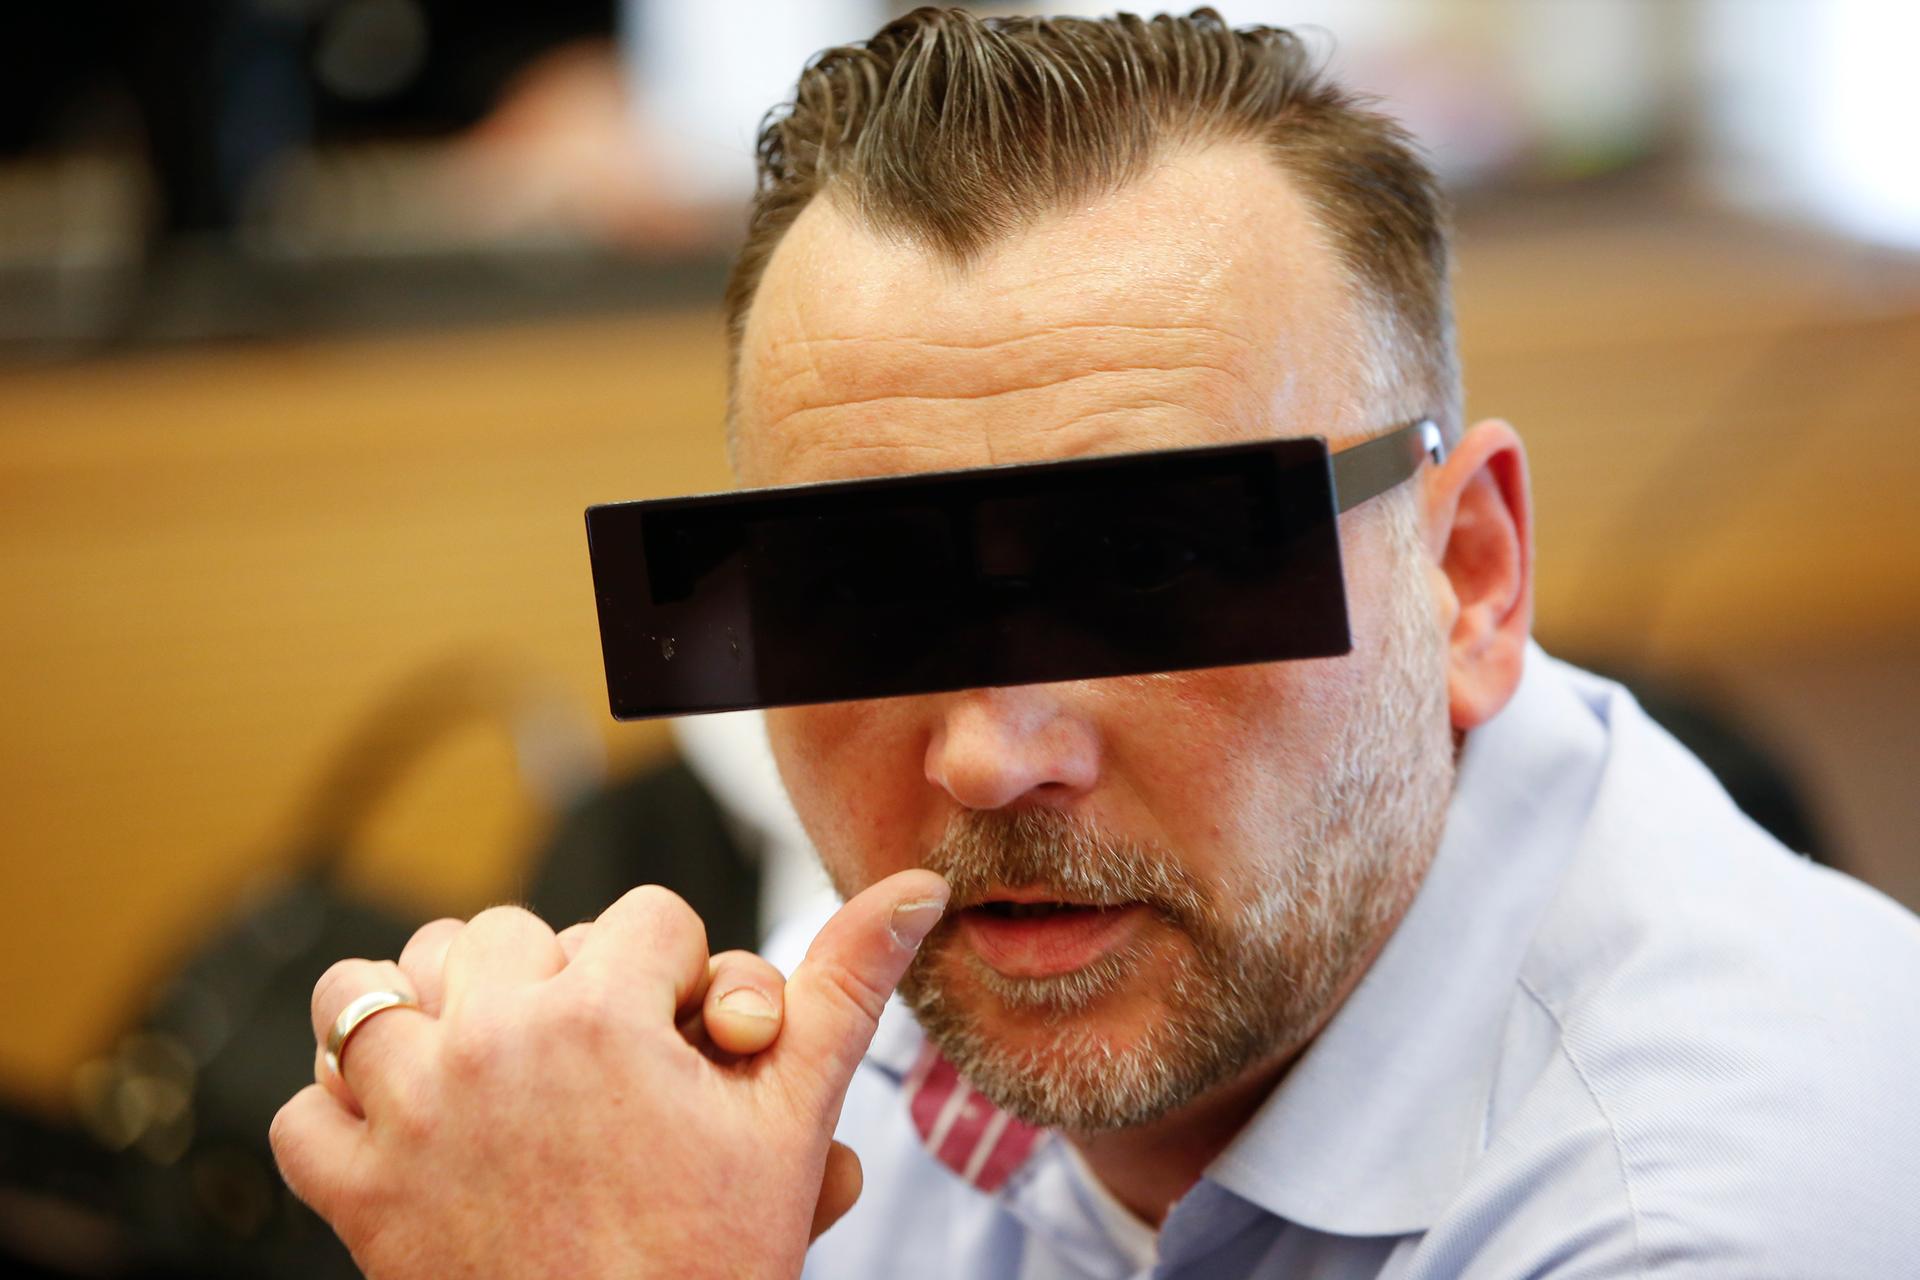 Lutz Bachmann, co-founder of Patriotic Europeans Against the Islamisation of the West (PEGIDA), waits in a courtroom for his trial to be charged with incitement over Facebook posts in a court in Dresden, Germany, April 19, 2016. 